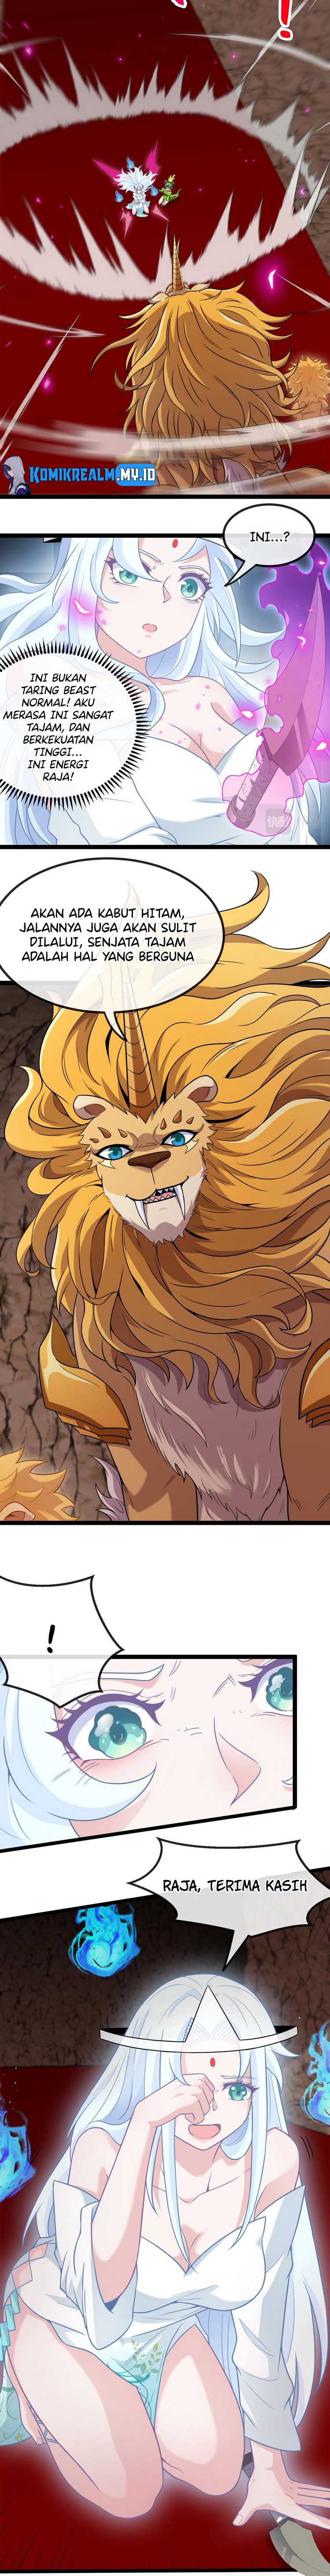 The Golden Lion King  Chapter 03 6